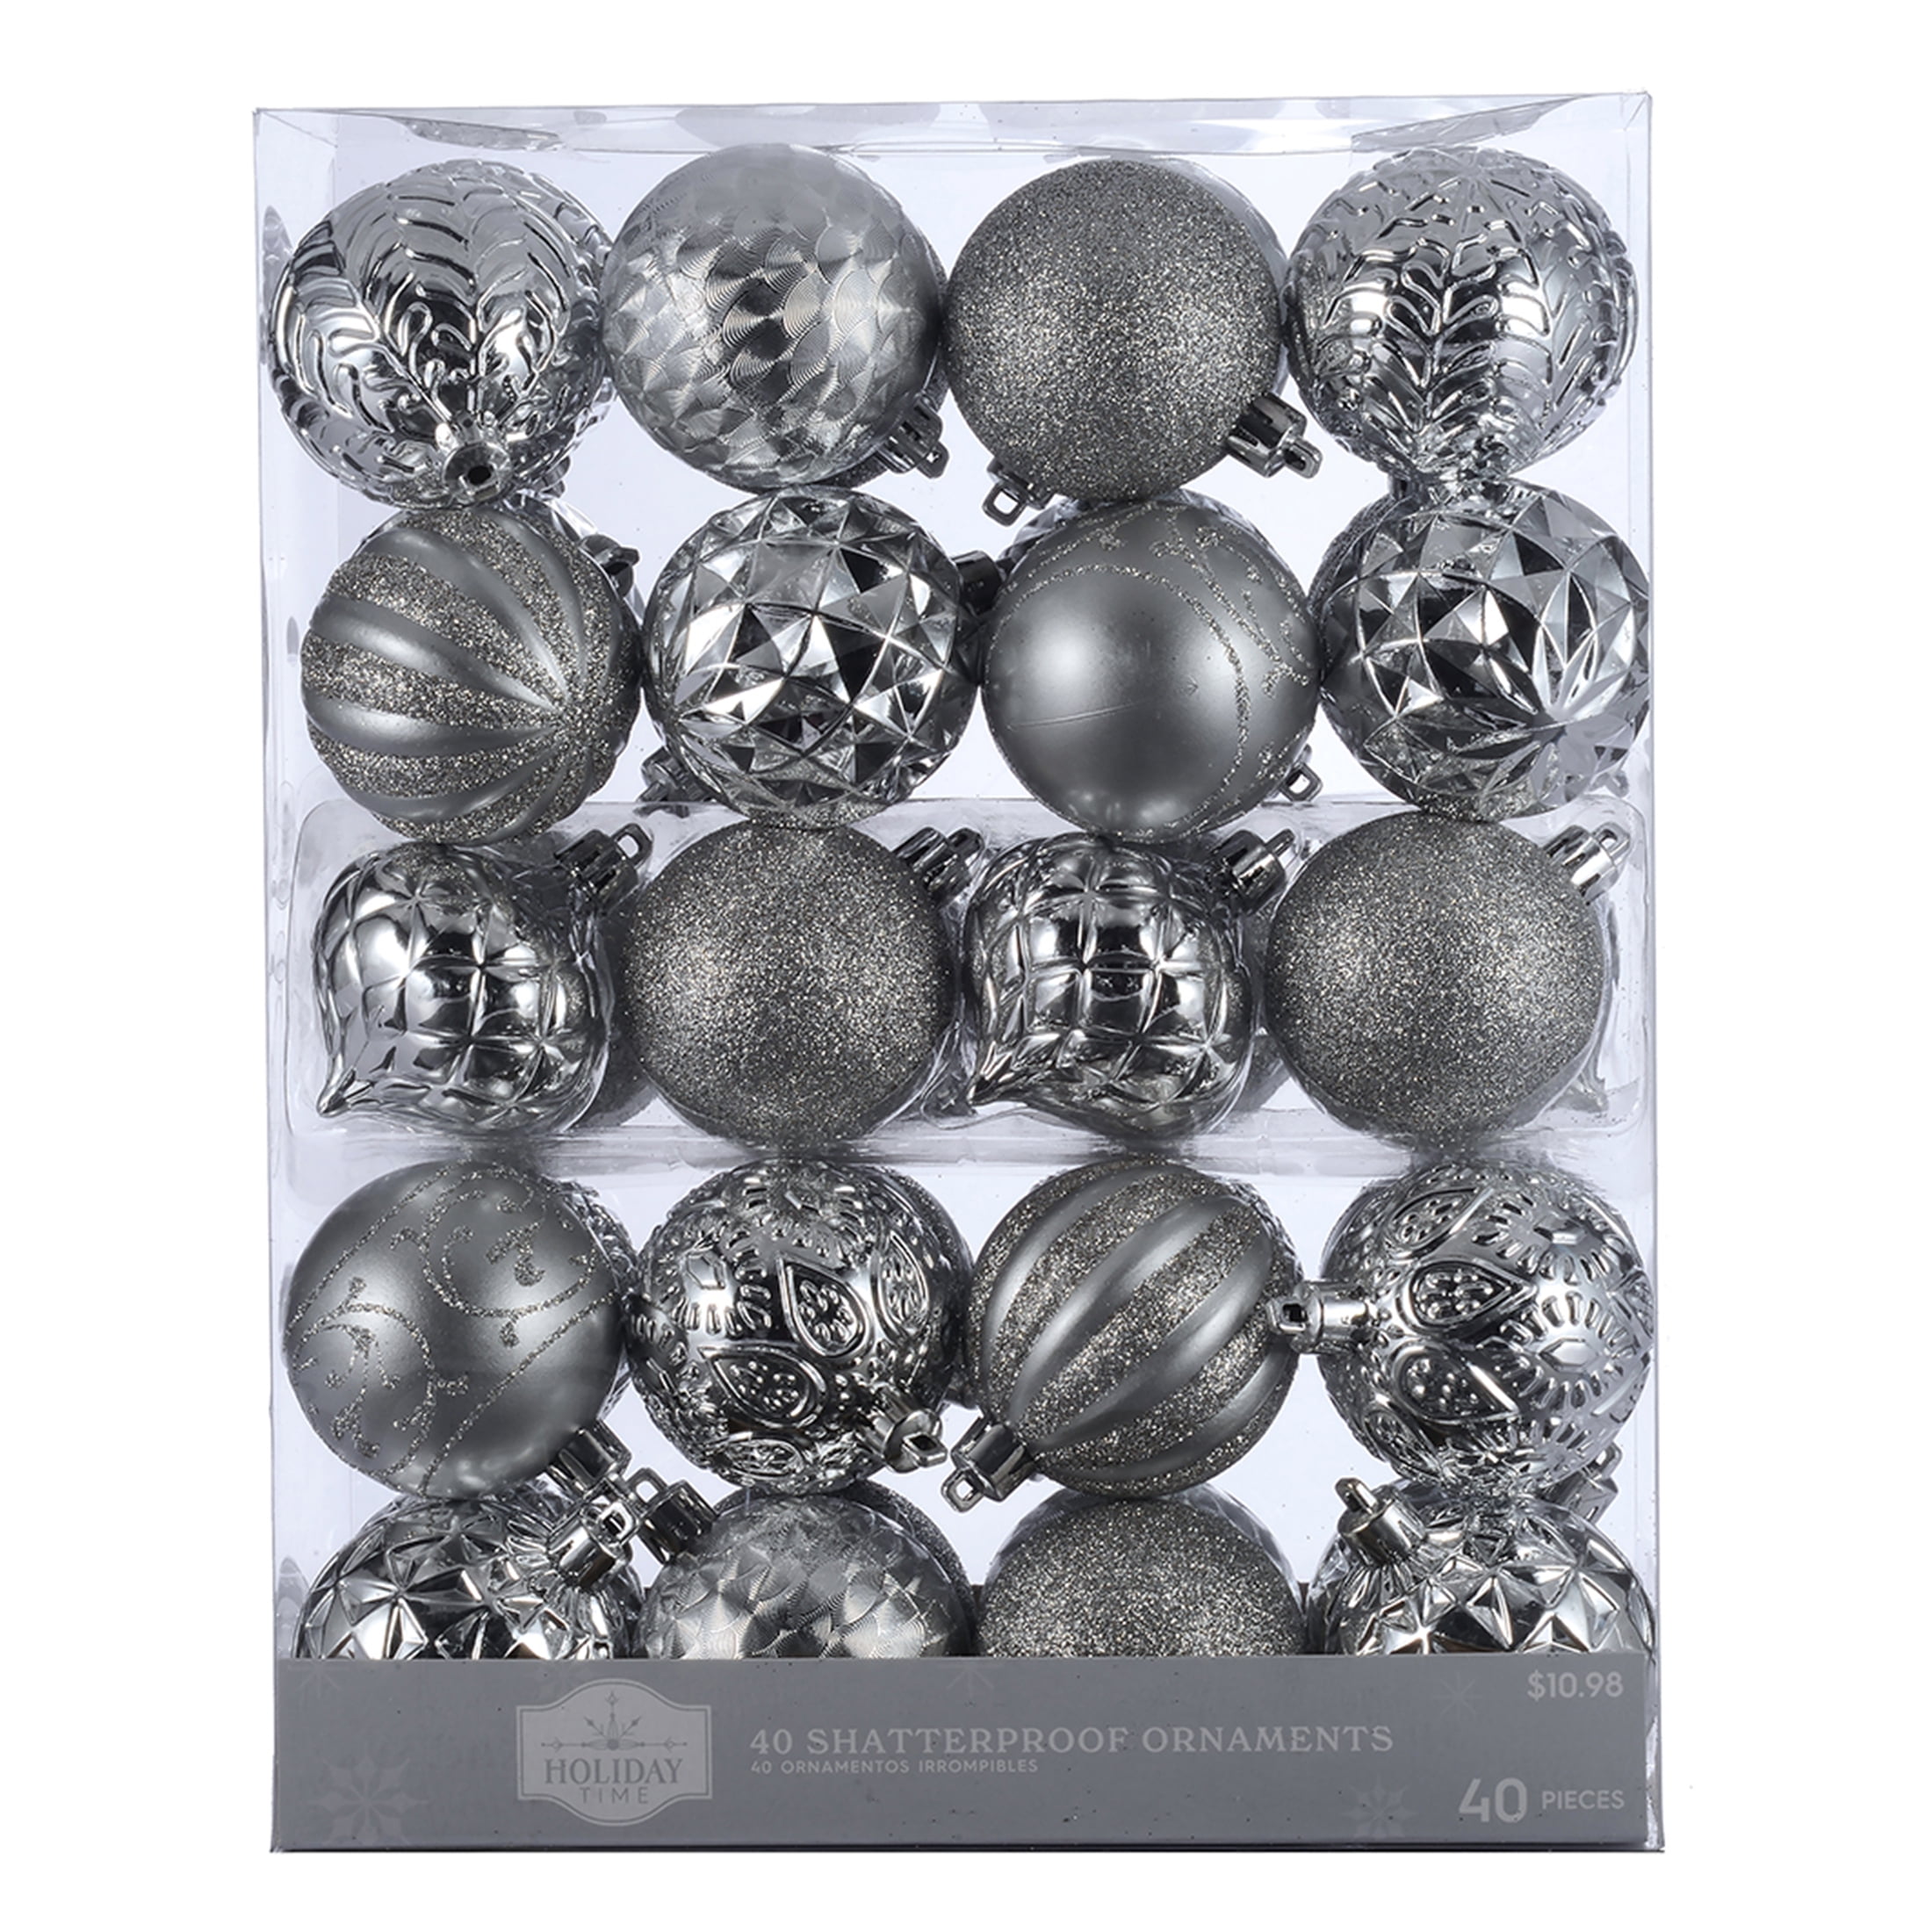 Holiday Time 60 mm Christmas Shatterproof Ornaments, Metallic Silver, 40-Count